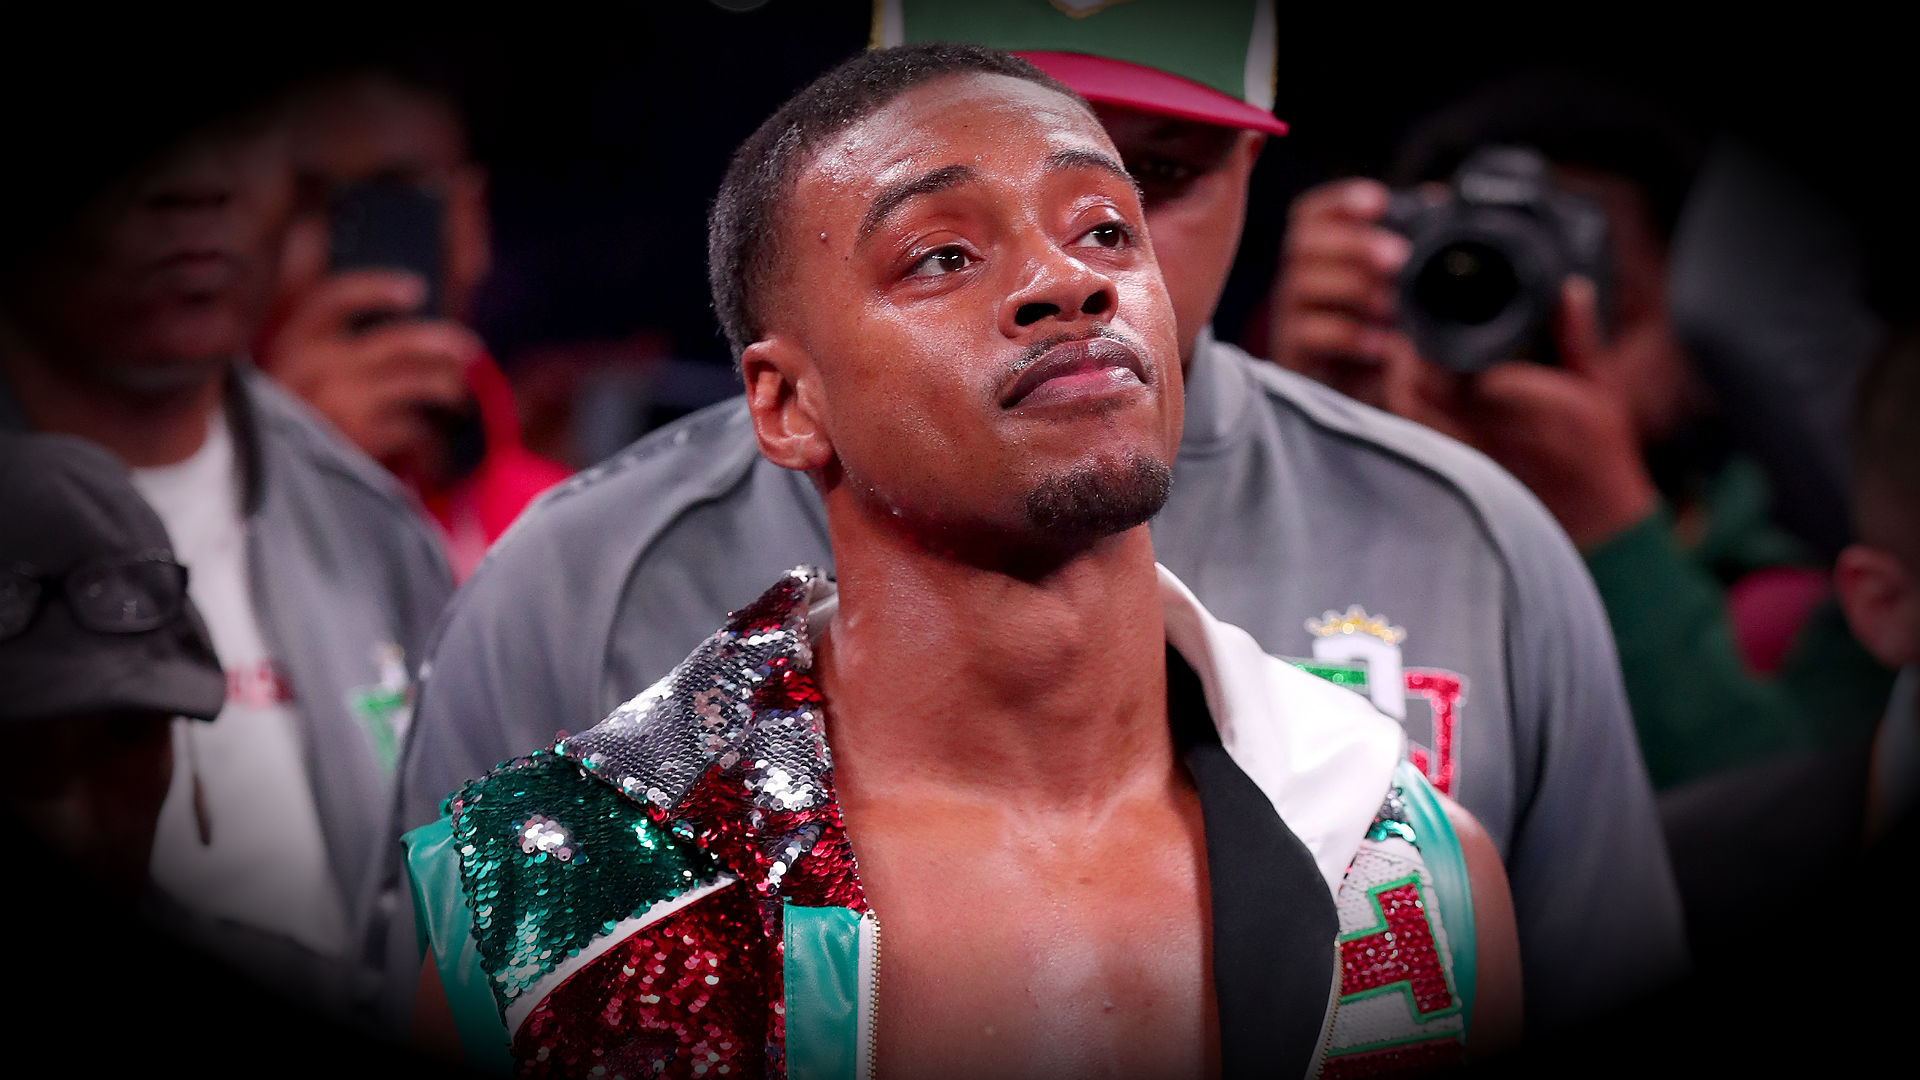 Errol Spence Jr., Terence Crawford, Possibility of not facing, Business Insider India, 1920x1080 Full HD Desktop